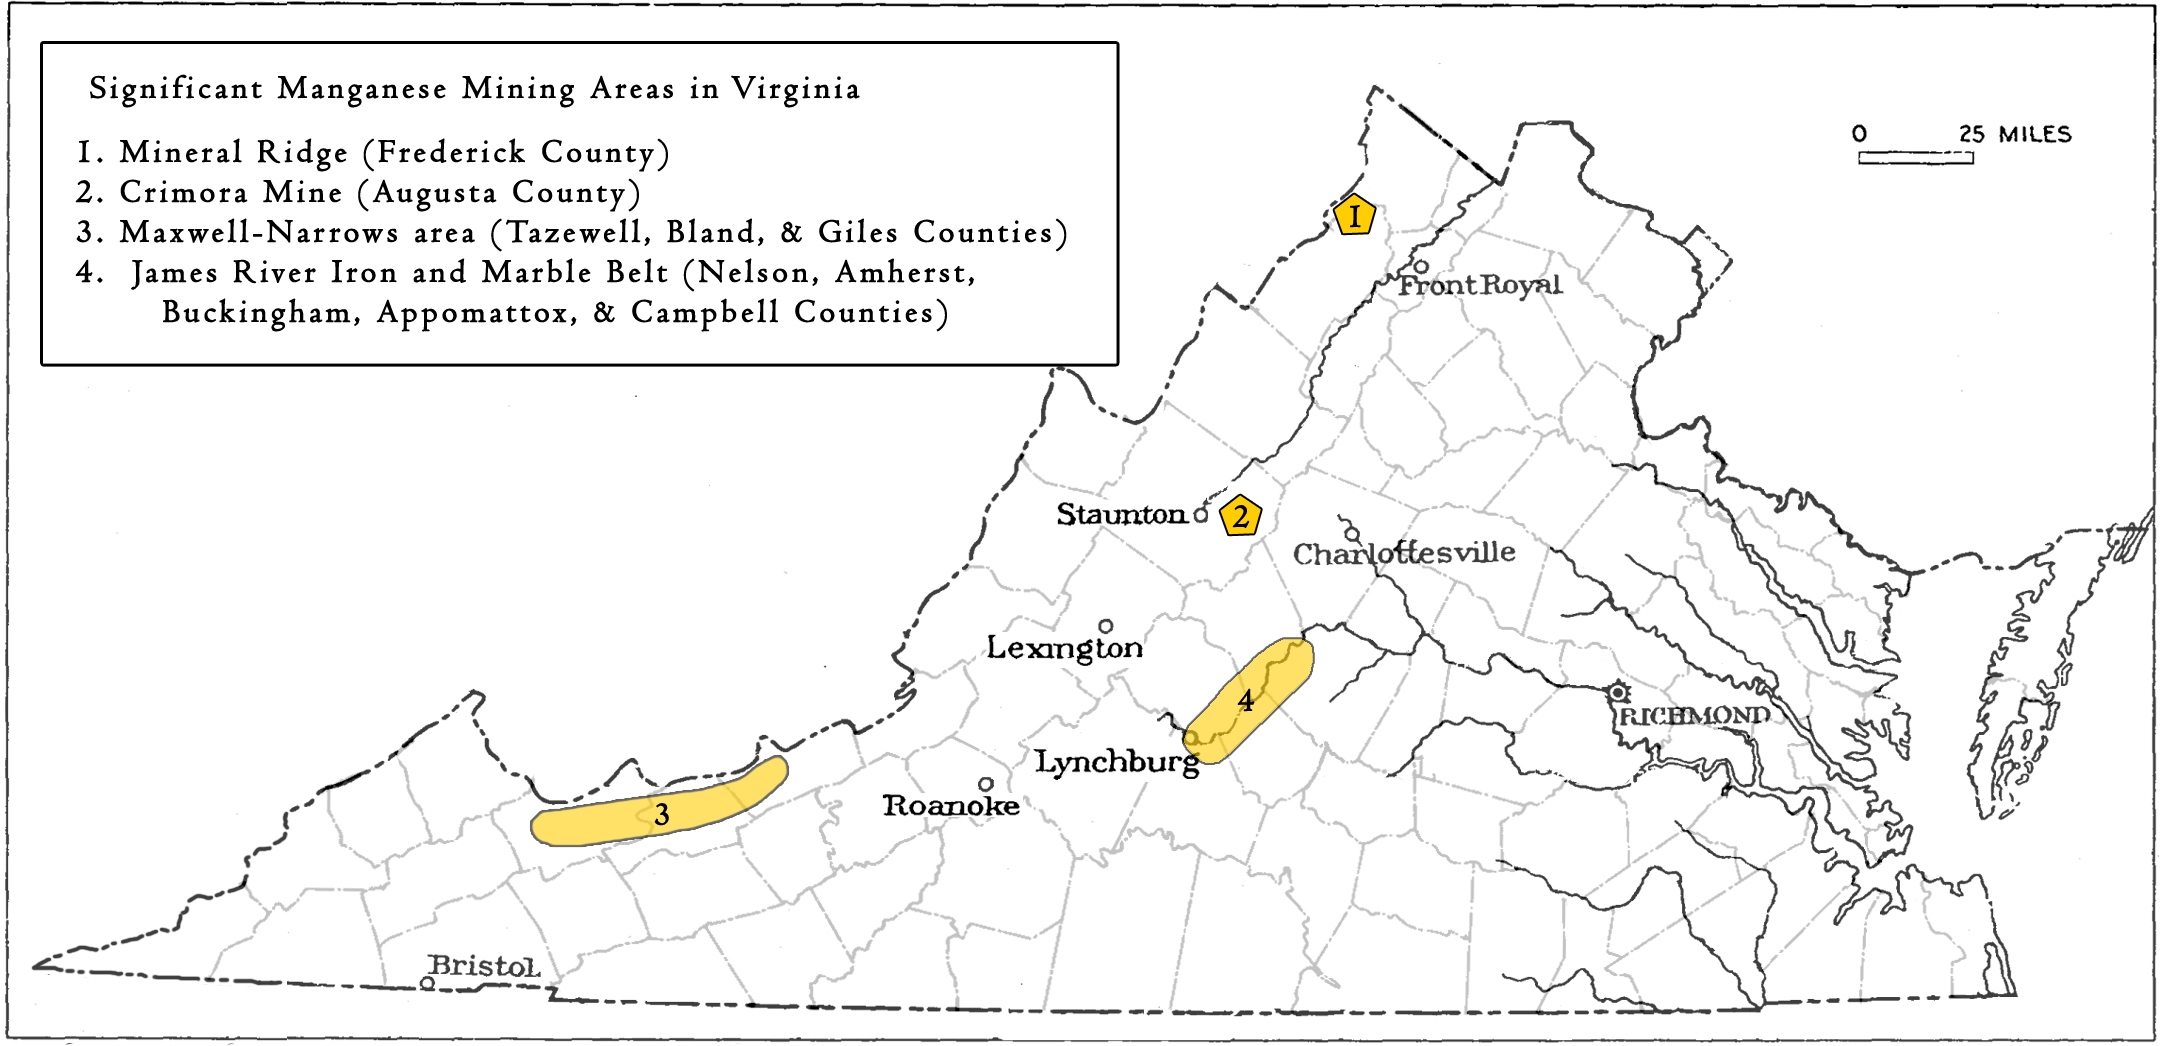 Manganese mines and prospects in Virginia